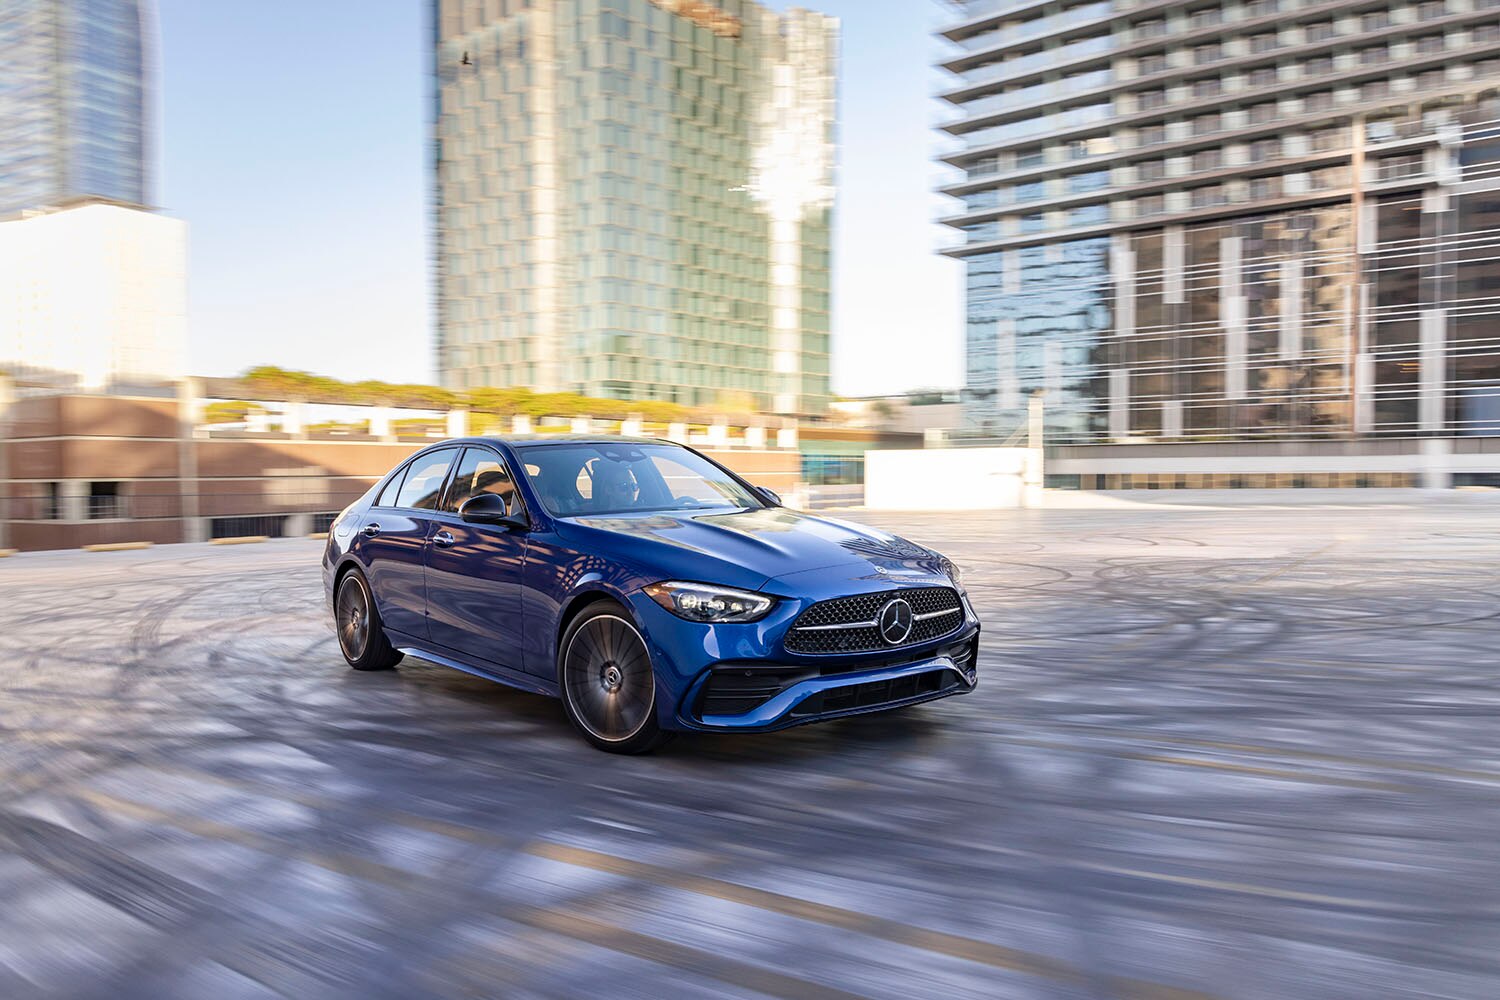 2022 Mercedes-Benz C-Class in blue driving on pavement